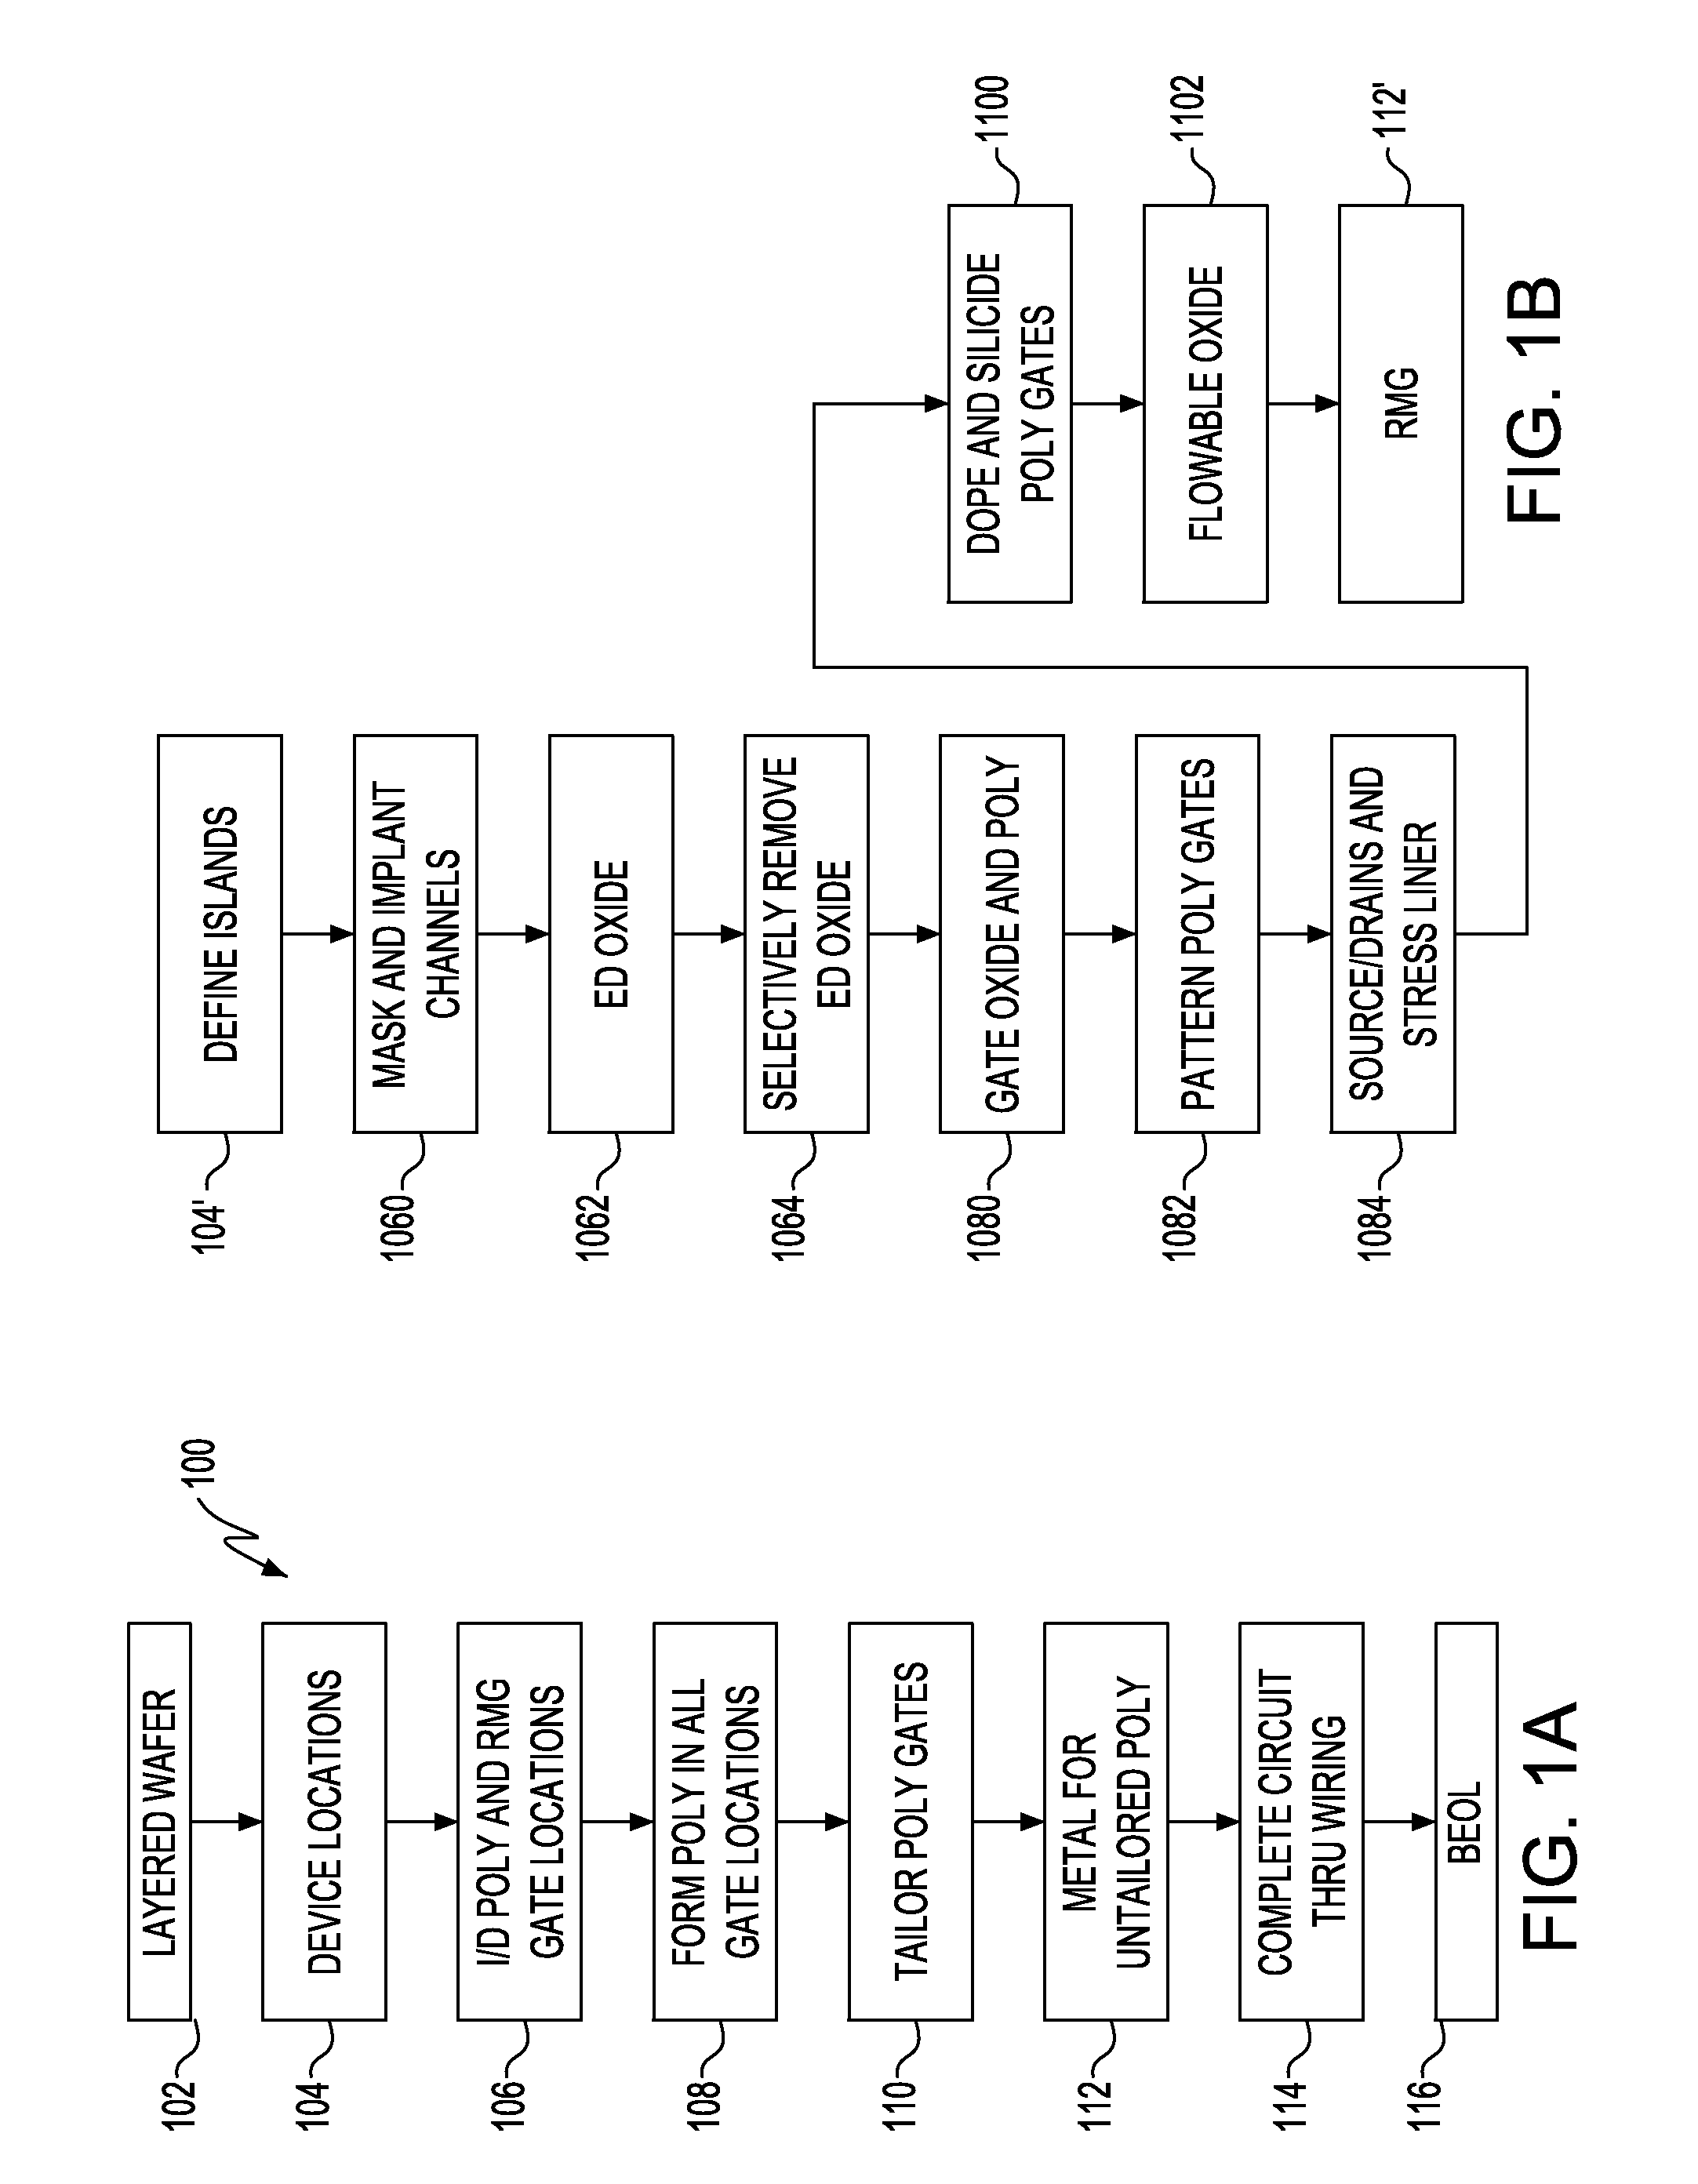 Integrated Circuit (IC) Chip Having Both Metal and Silicon Gate Field Effect Transistors (FETs) and Method of Manufacture